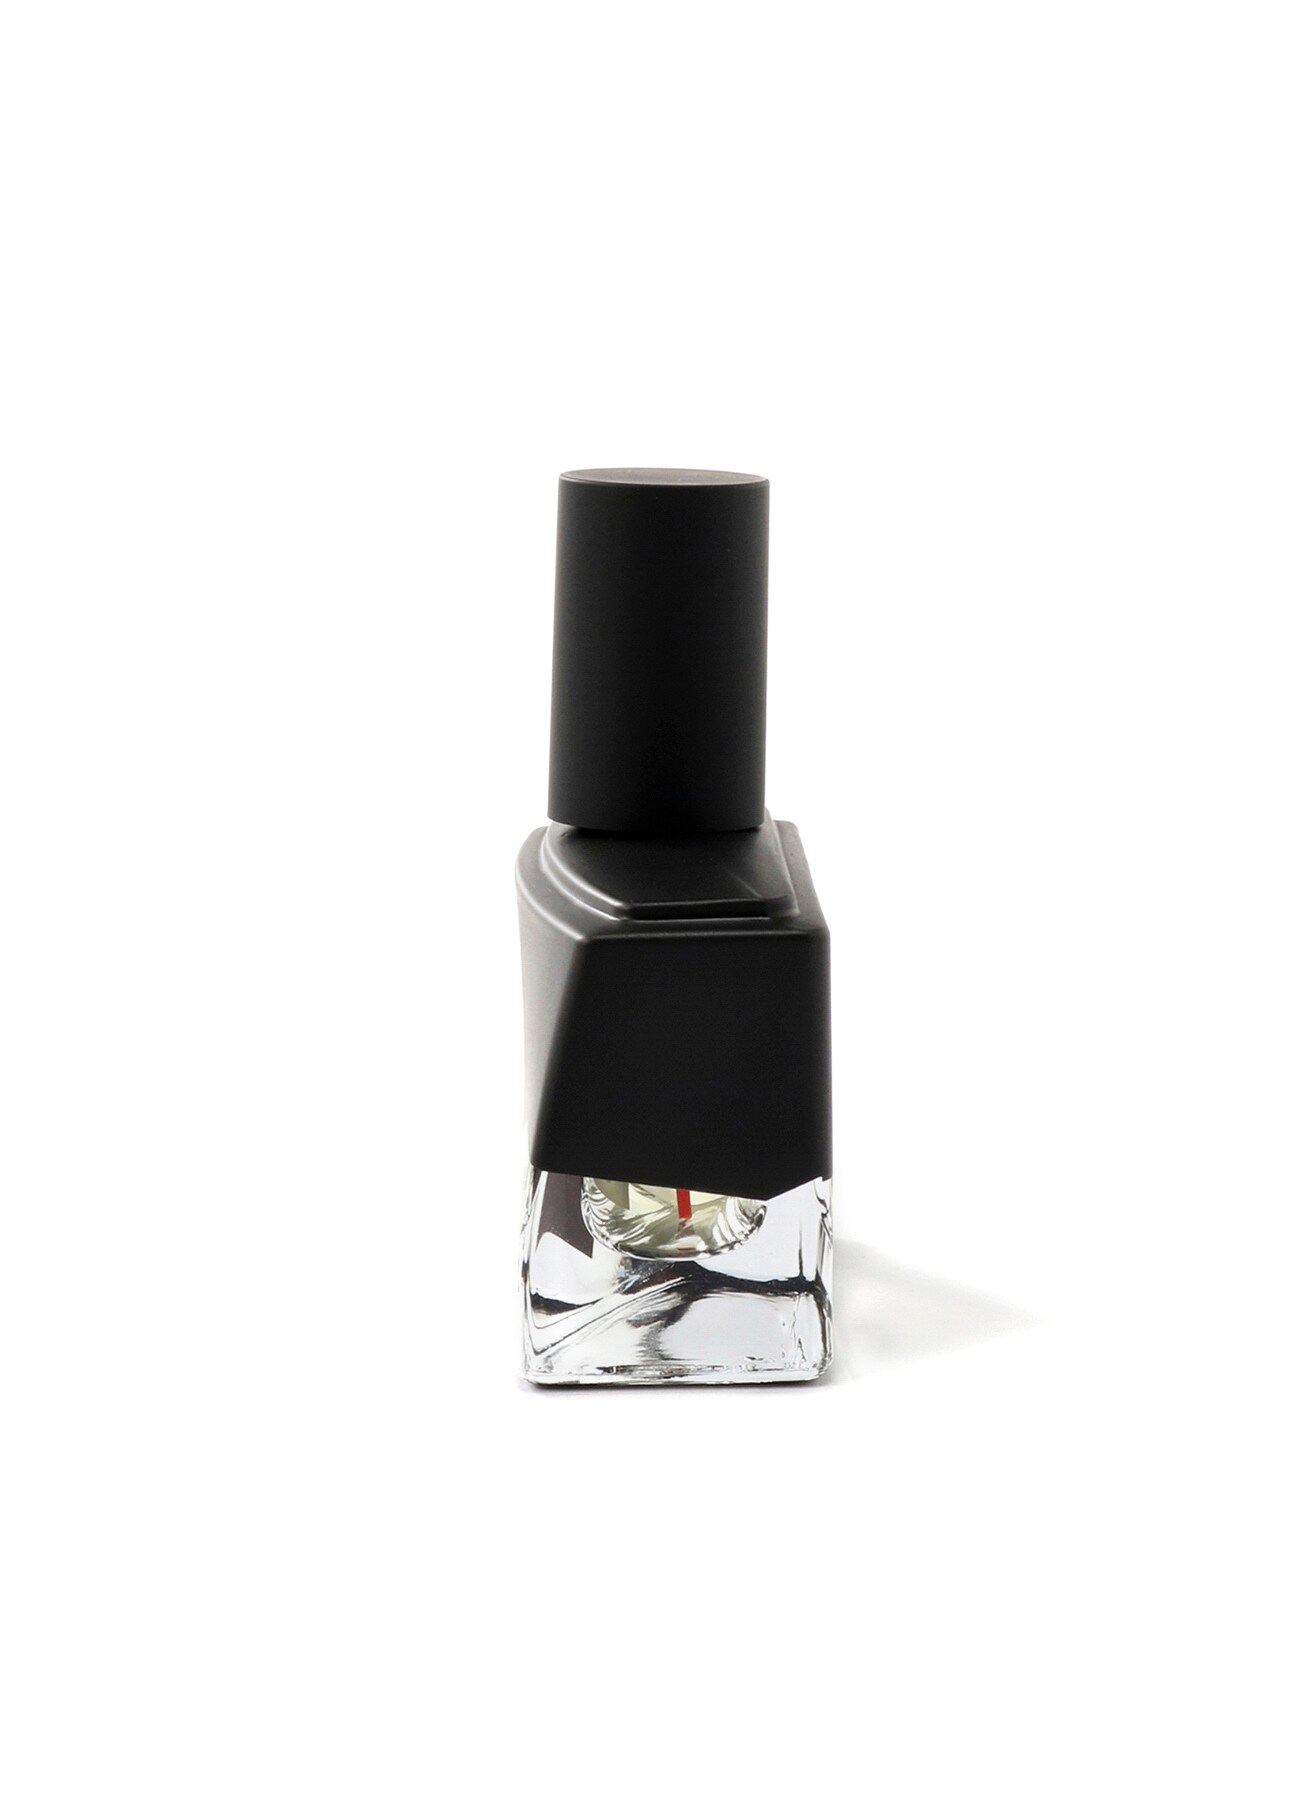 I AM NOT GOING TO DISTURB YOU FEMME 30ml